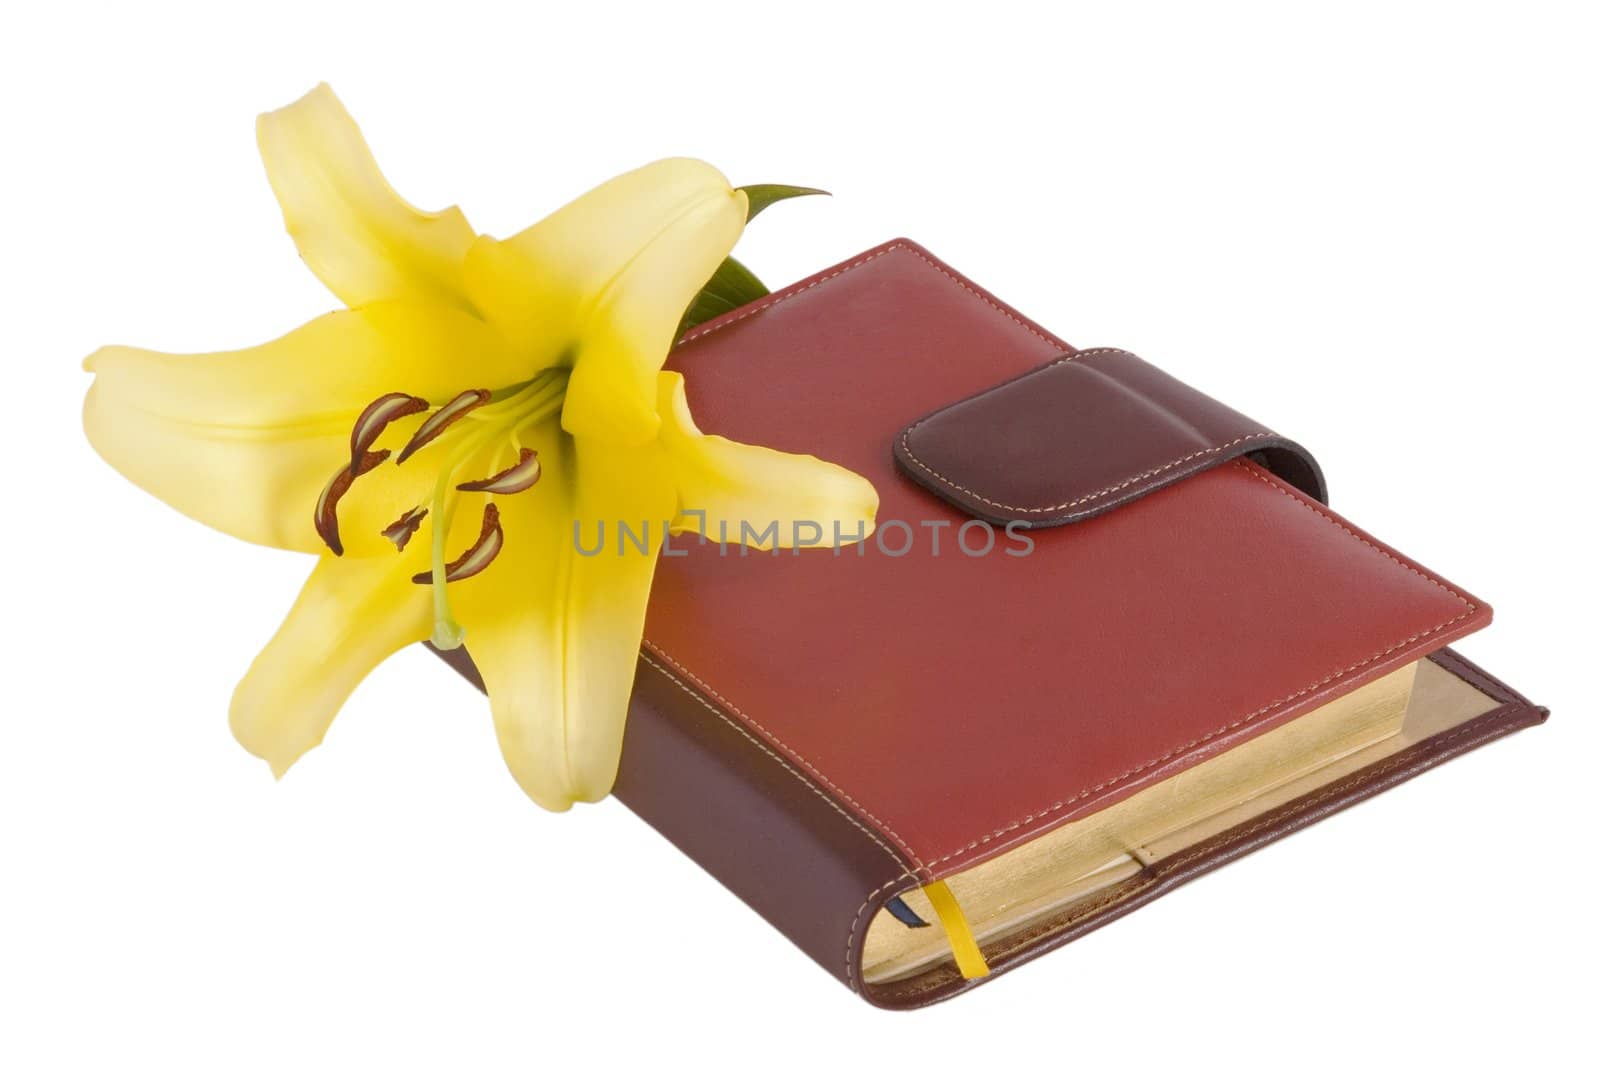 blossom yellow lily flower and notebook by VictorO